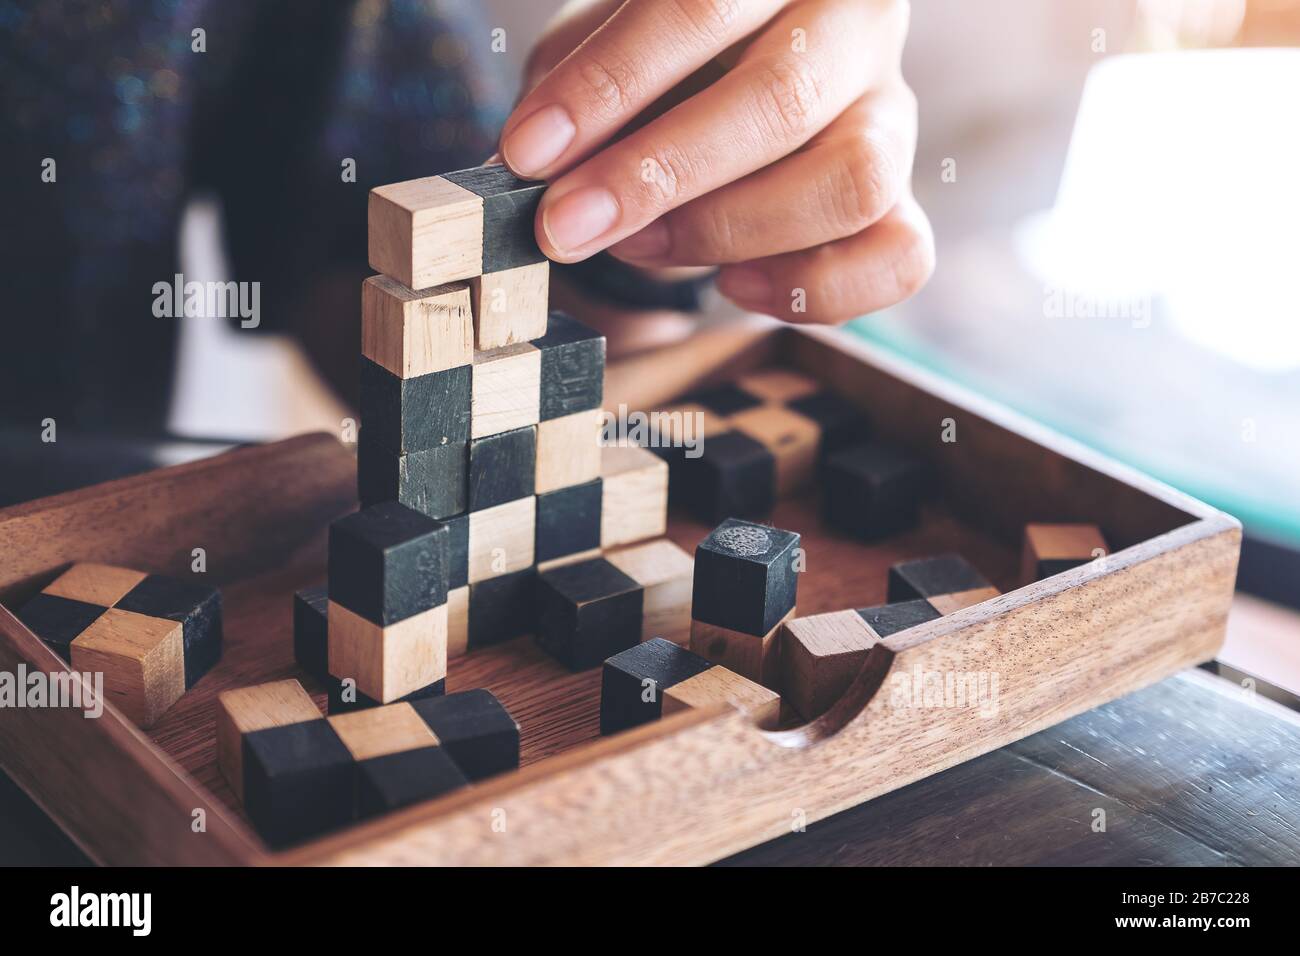 Closeup image of people playing and building wooden puzzle game Stock Photo  - Alamy